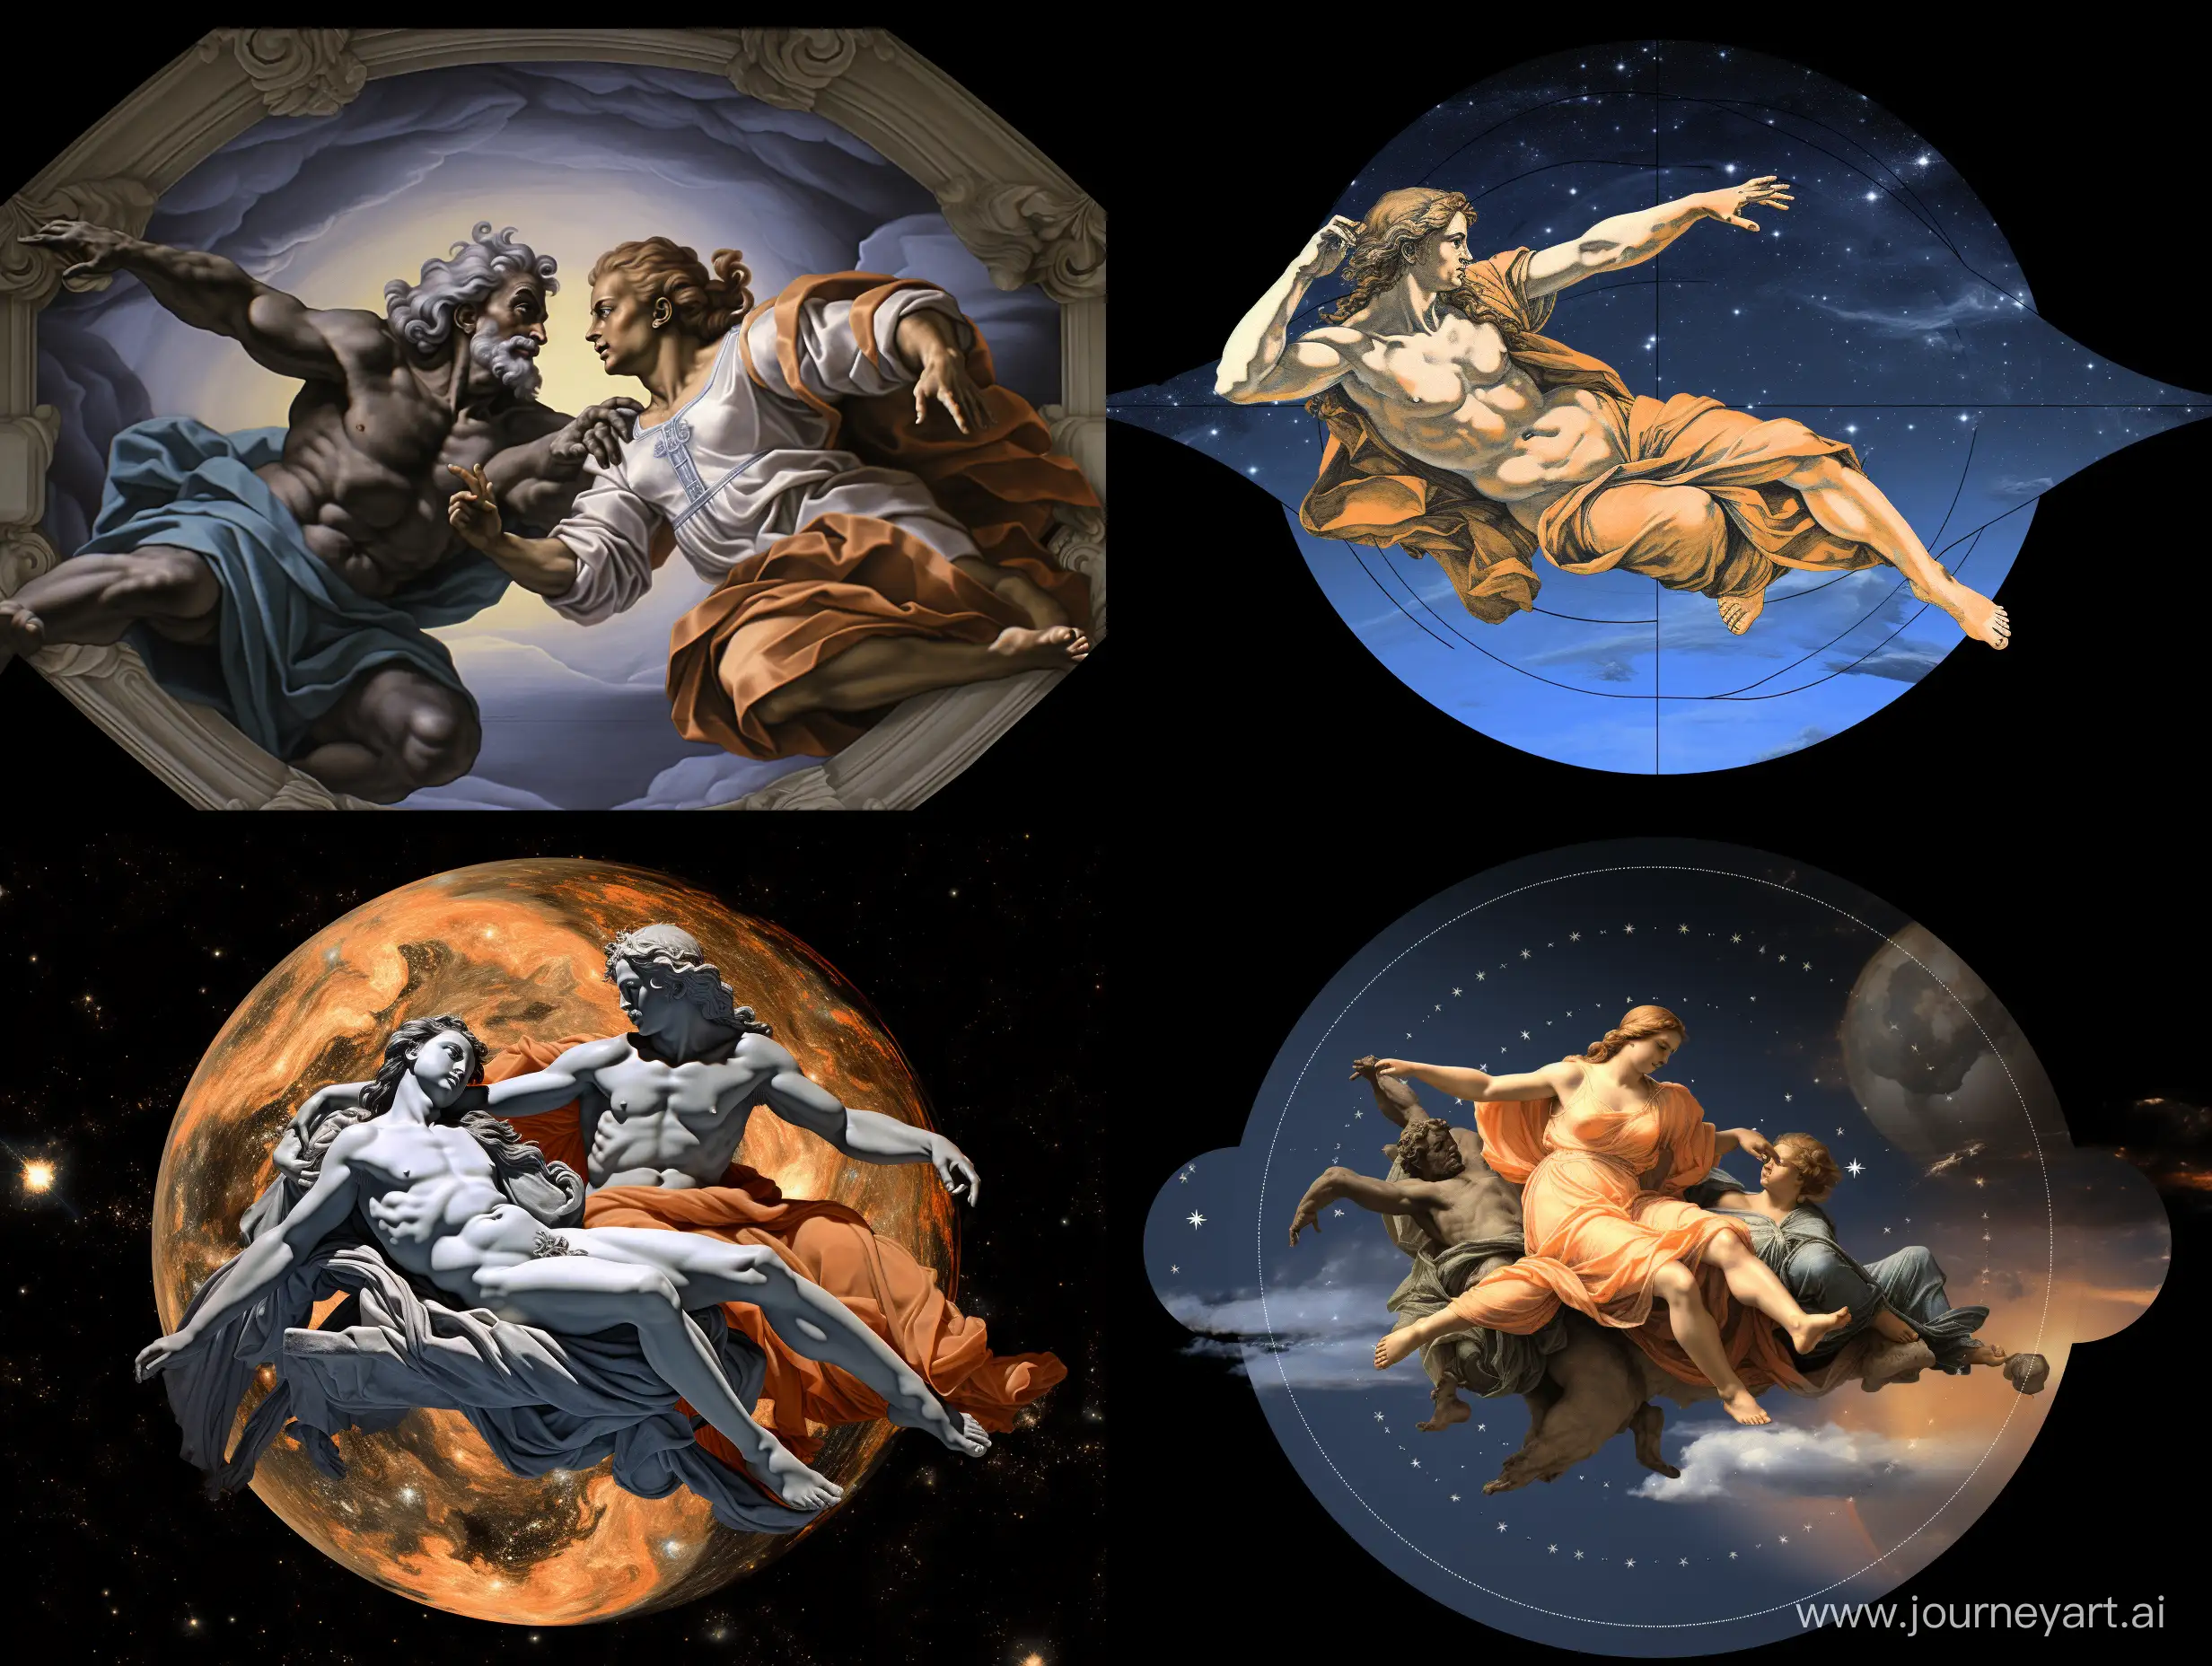 base on an image "The Creation of Adam" by Michelangelo. I'd like to create a new sketch picture that the left side to feature Sir Isaac Newton on the earth globe and the right side to feature an astronaut in-space, in a style similar to the original artwork.
The image ratio is 16:9 as i will use as a desktop background.